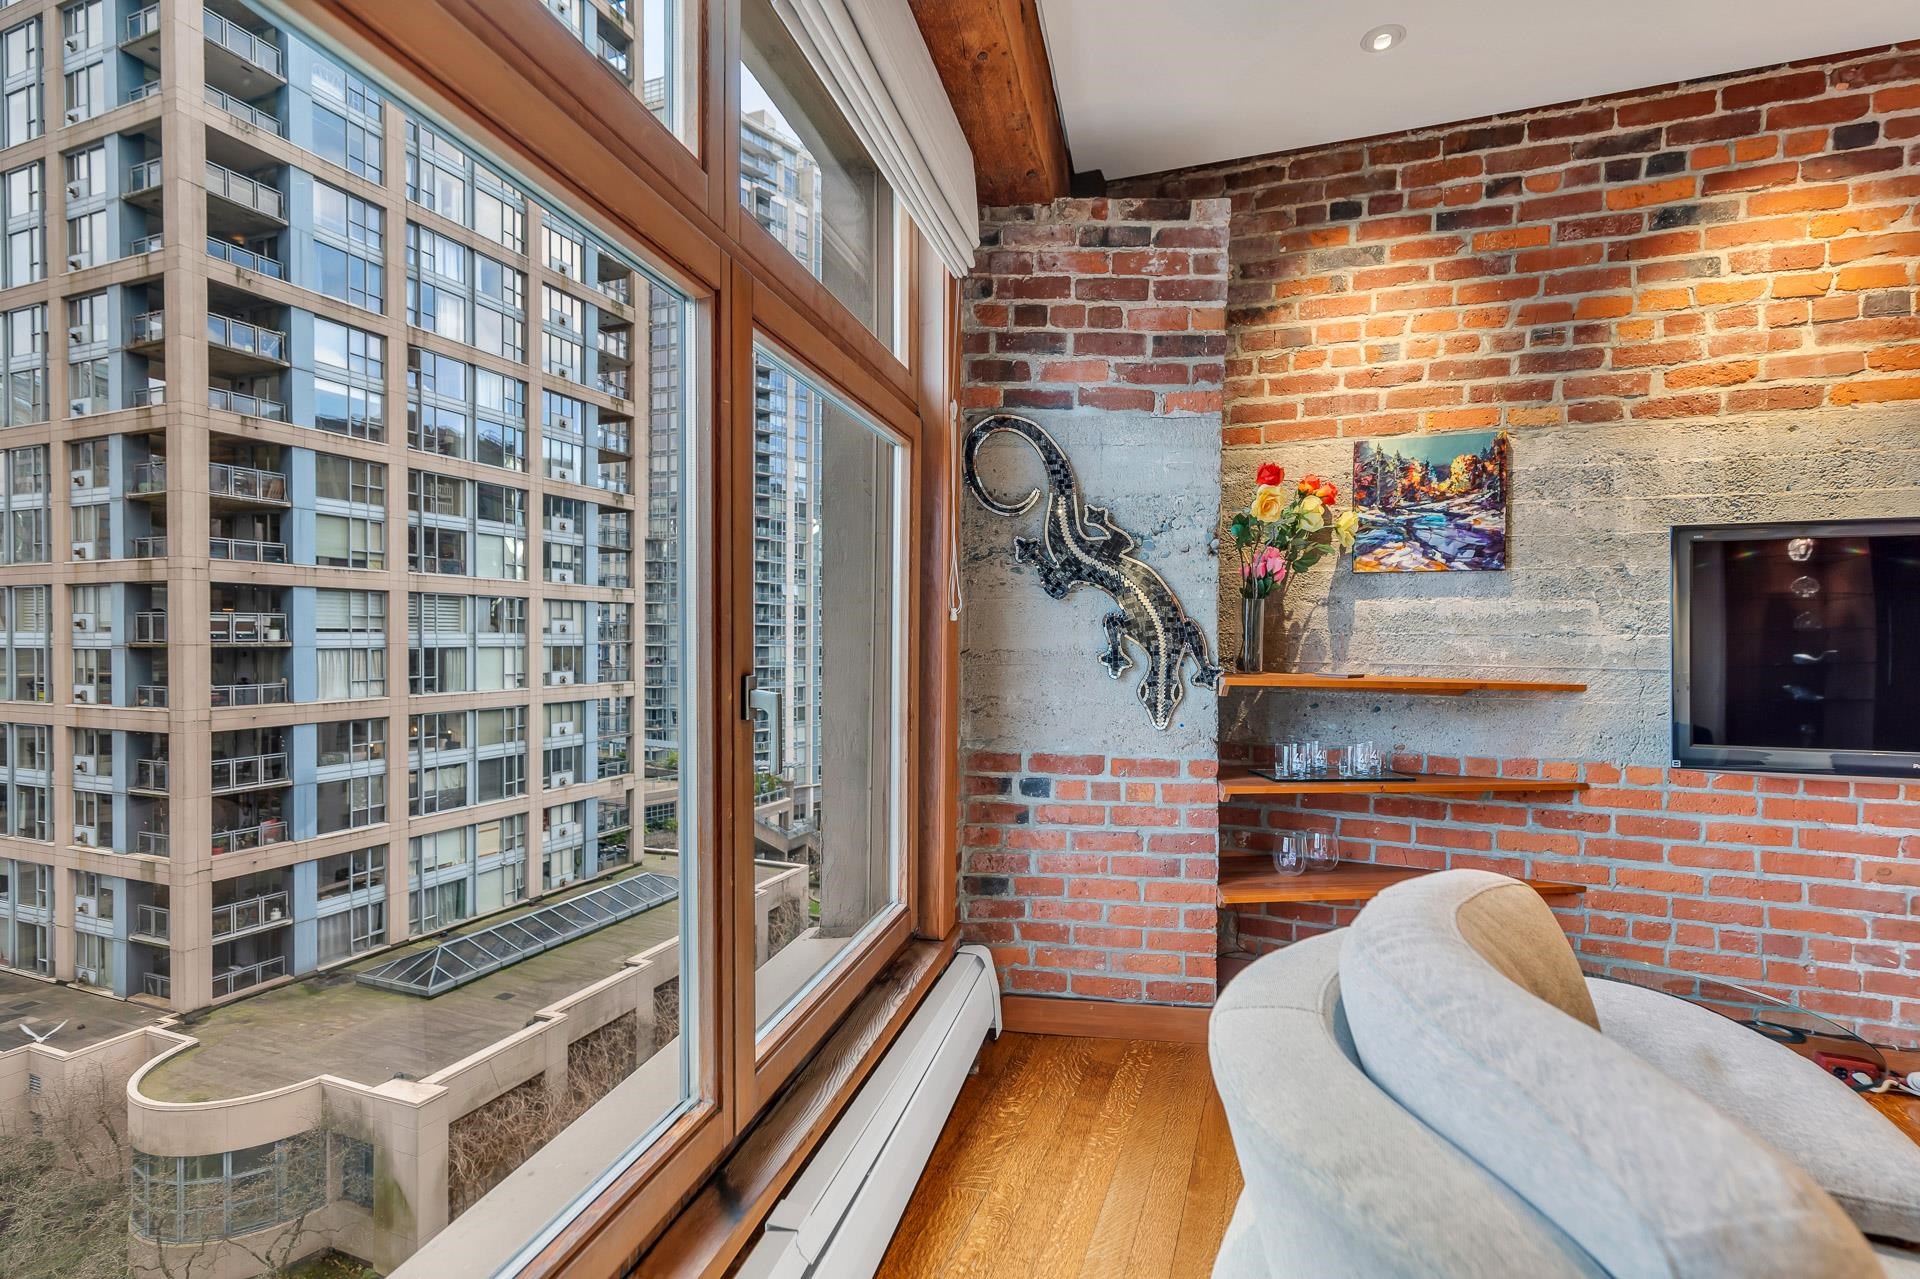 804-518 BEATTY STREET, Vancouver, British Columbia, 1 Bedroom Bedrooms, ,2 BathroomsBathrooms,Residential Attached,For Sale,R2840490